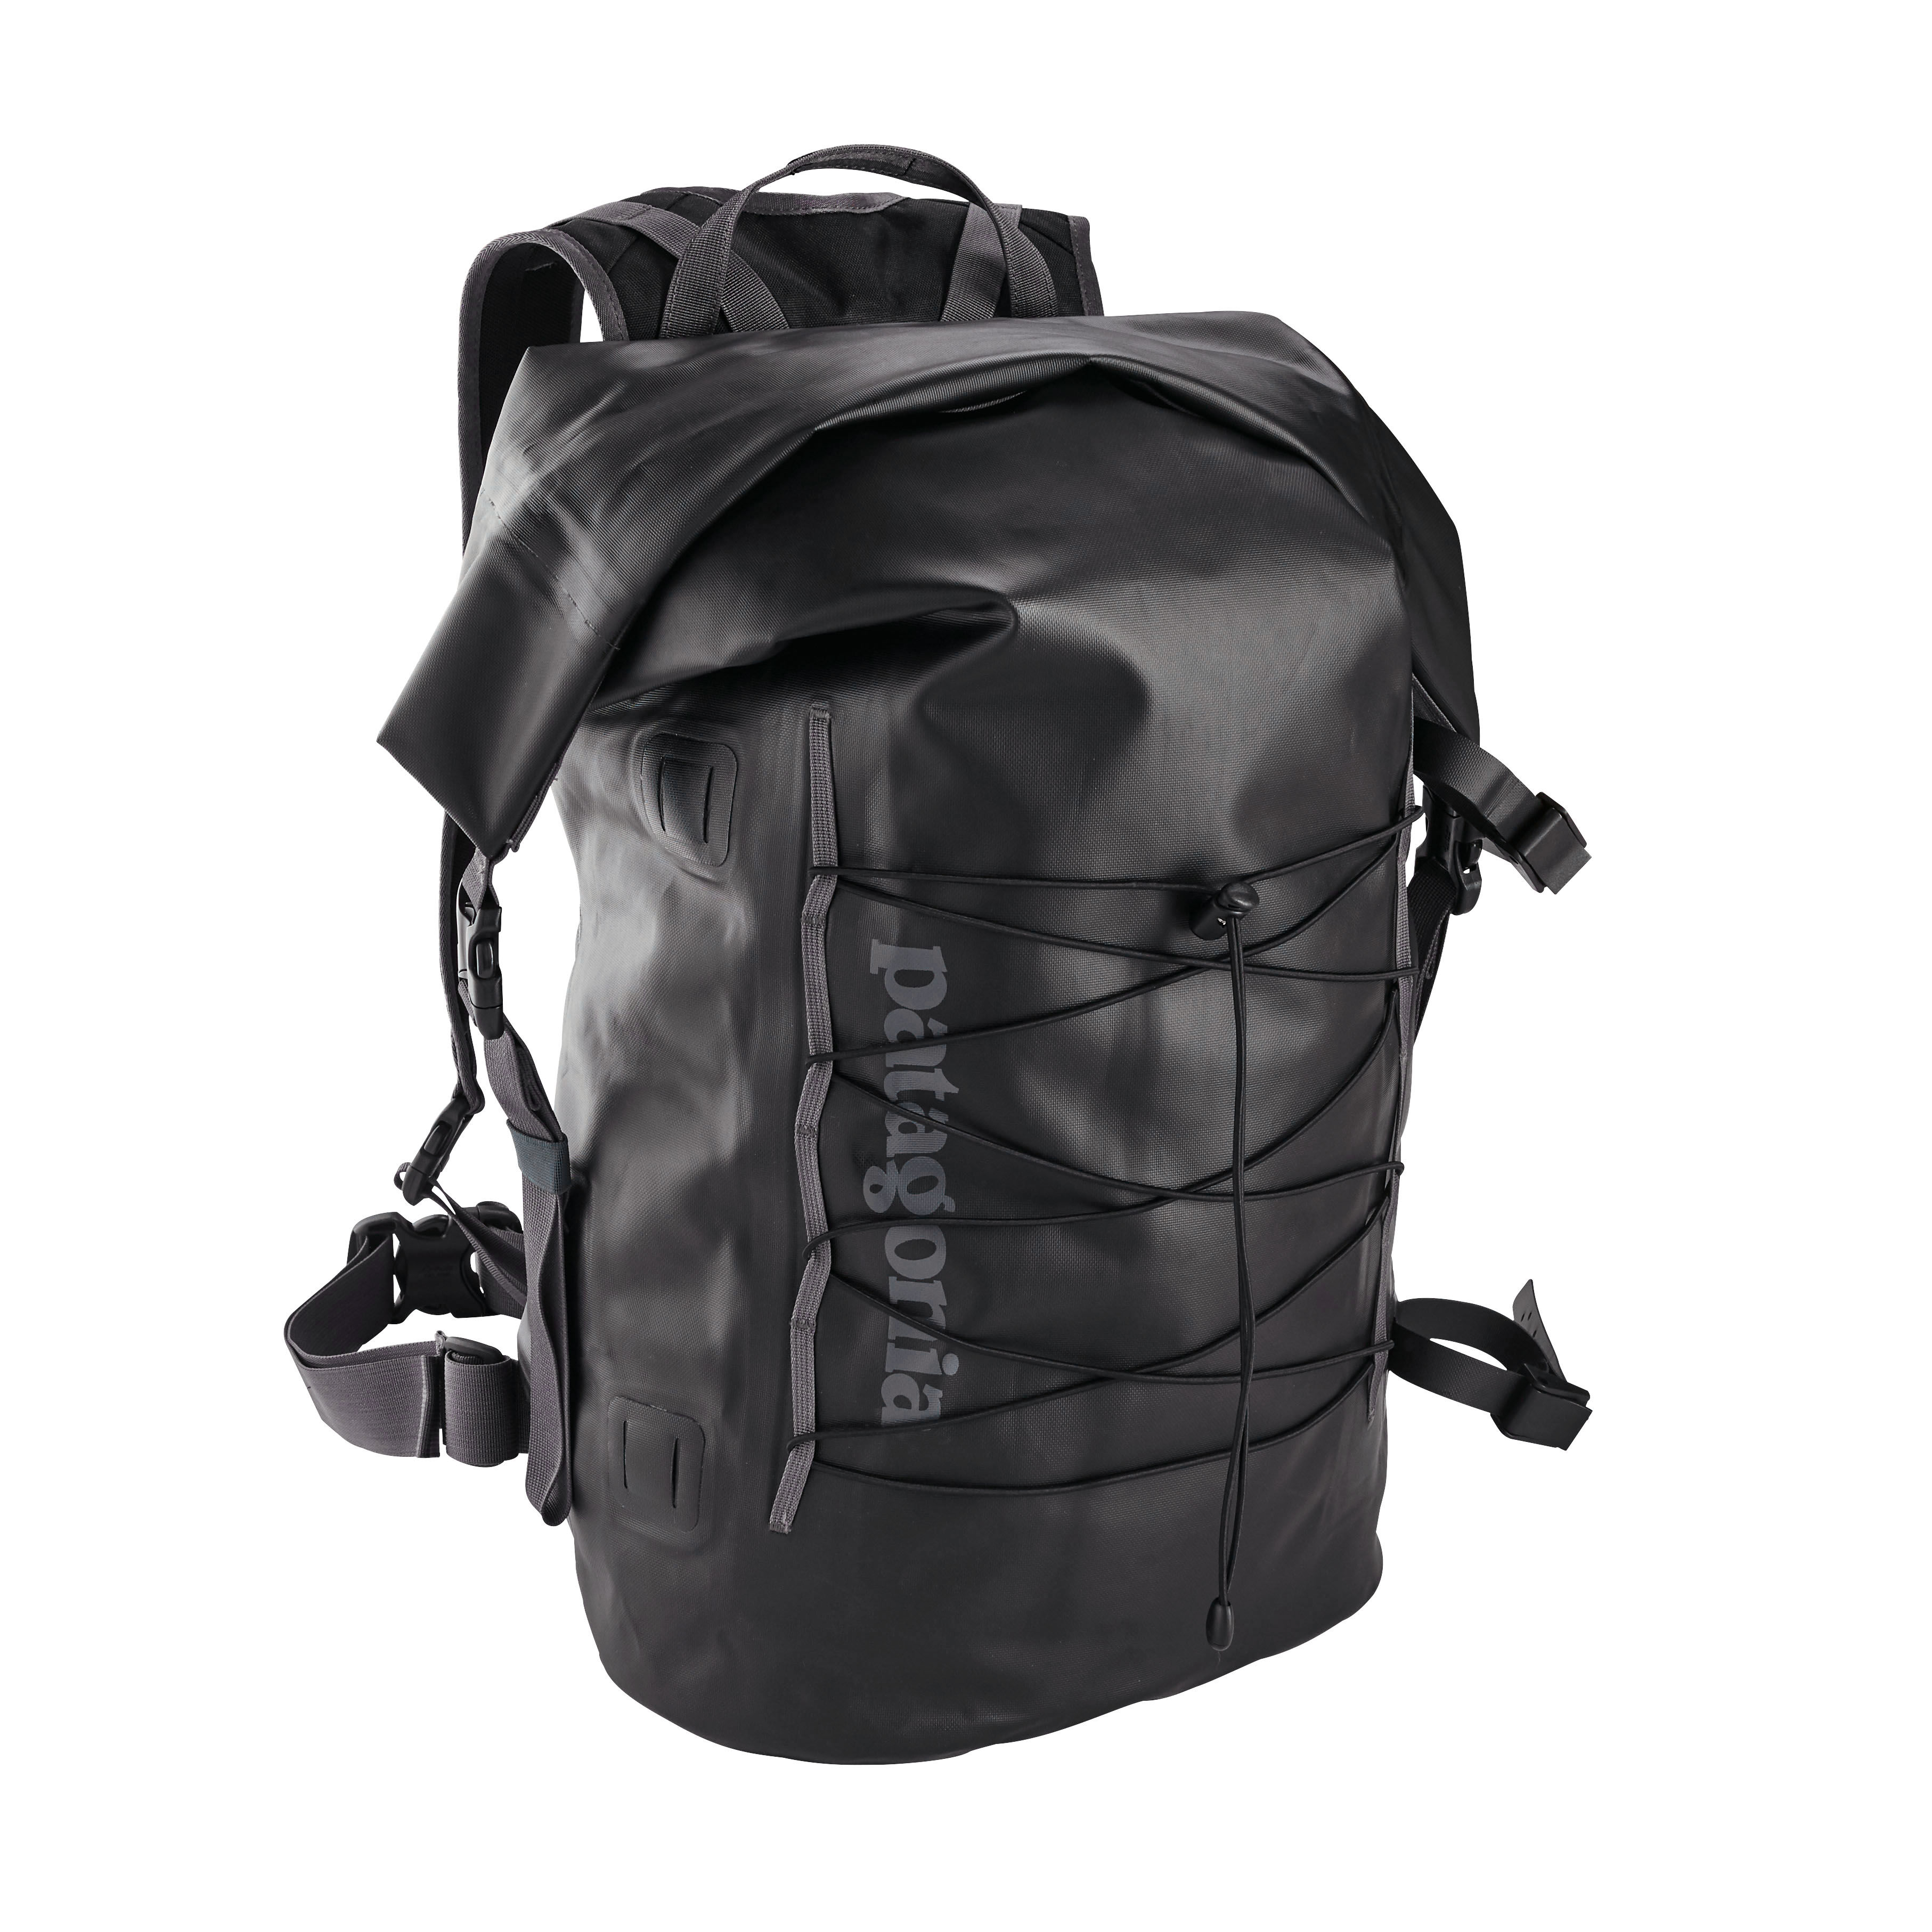 Patagonia Stormfront Roll Top Pack 45 L - Rygsæk